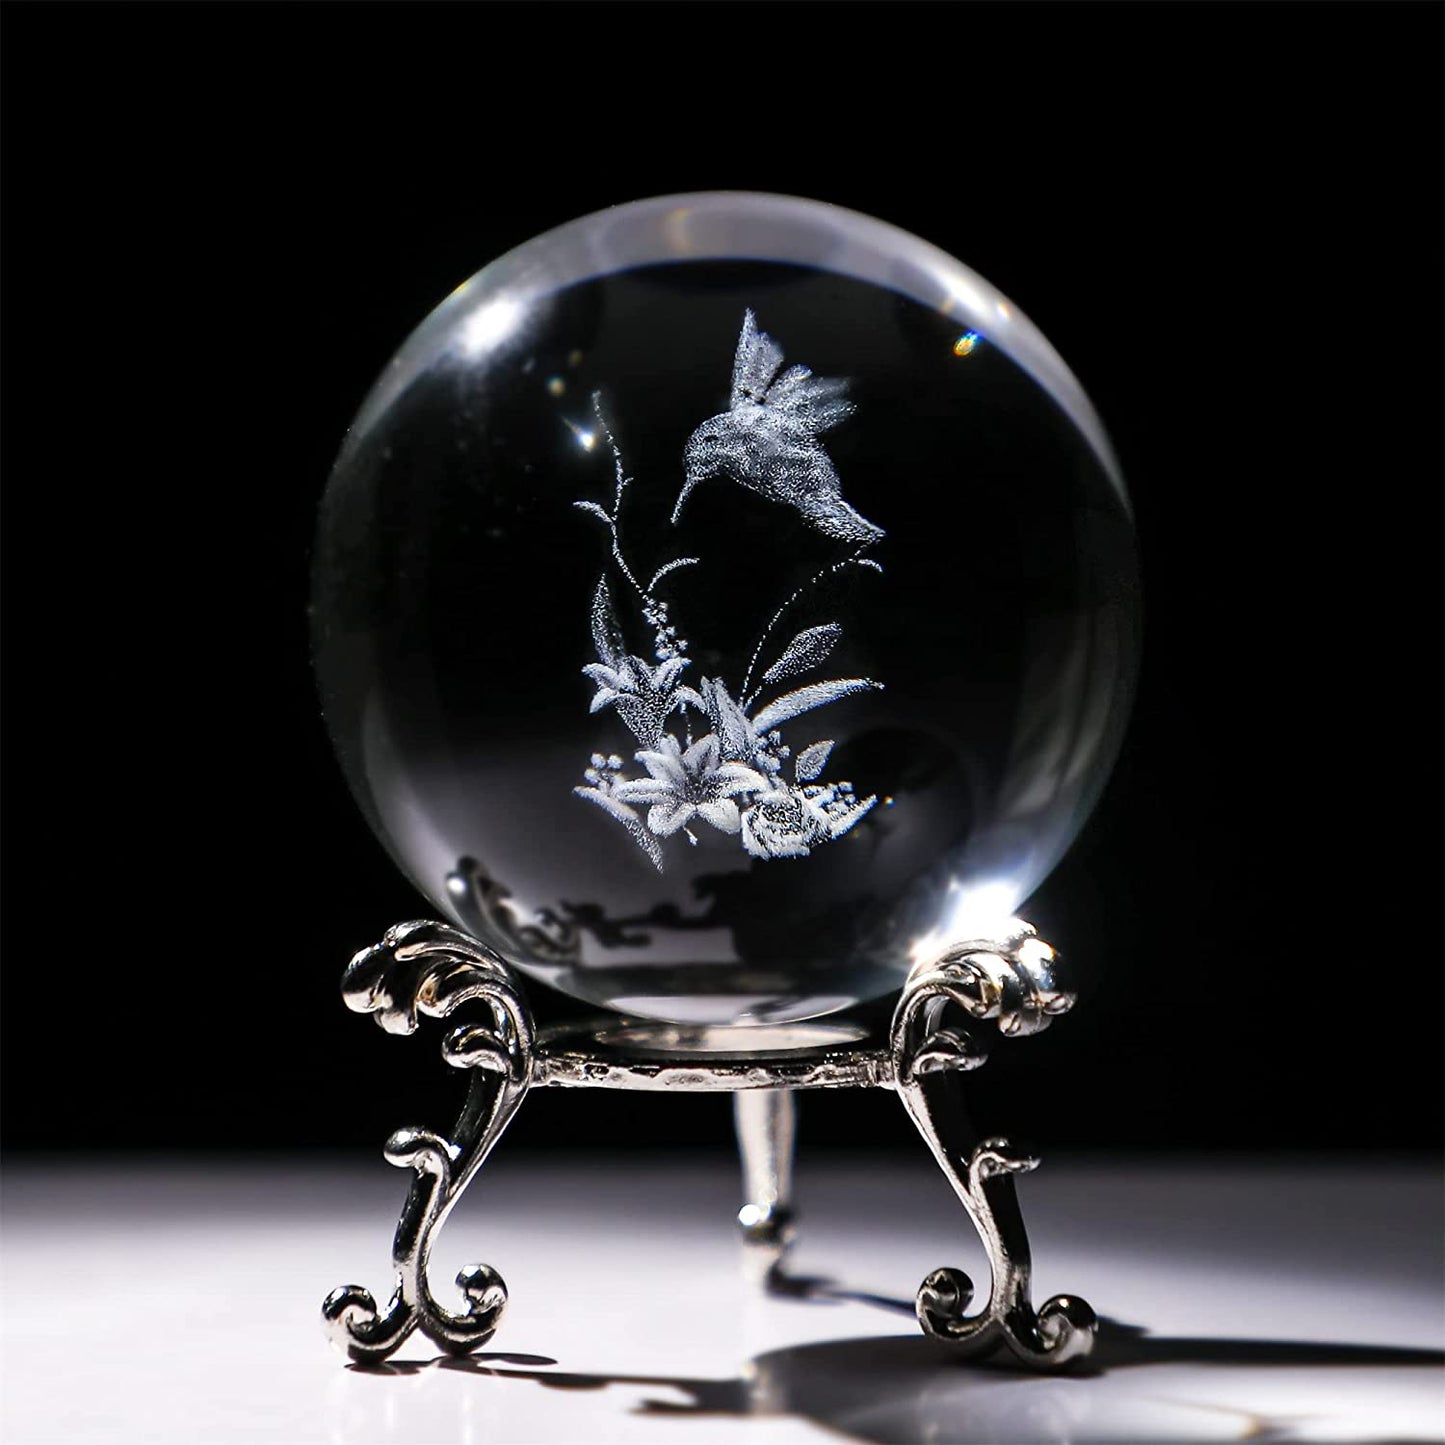 3D Hummingbird Crystal Ball Paperweight 60mm(2.3Inch) Laser Engraved Glass Sphere Display Globe Meditation Ball Home Decor with Metal Stand